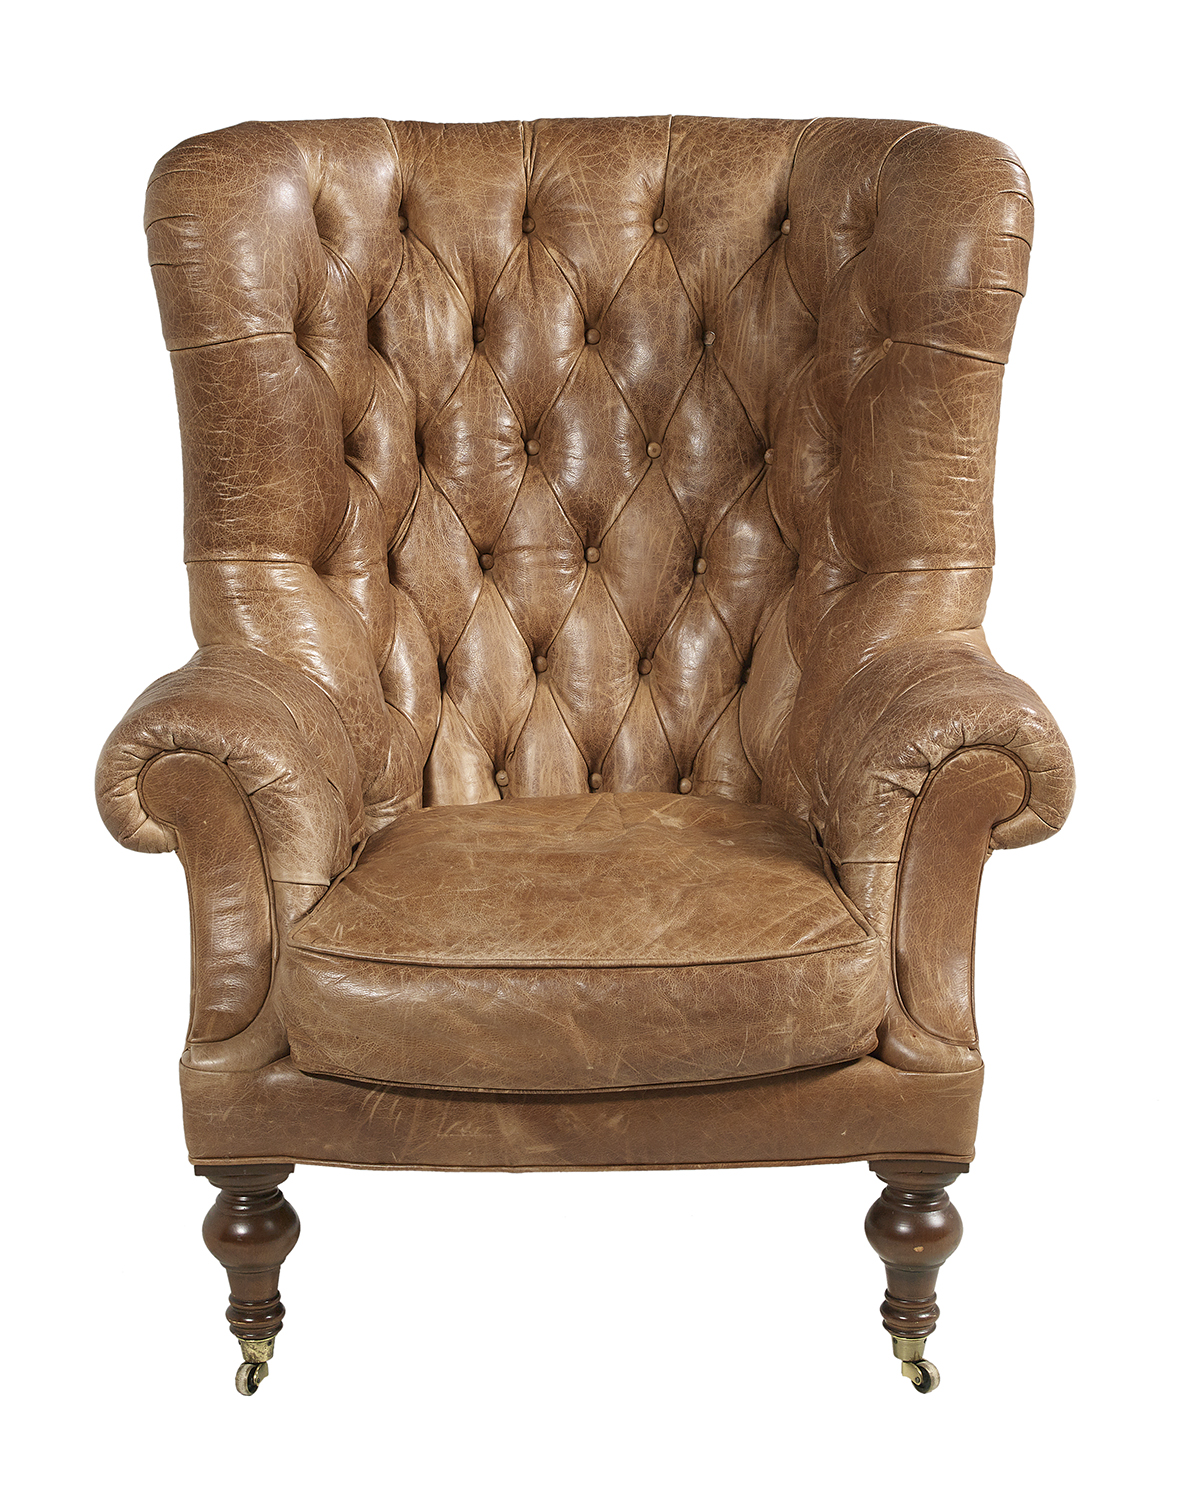 Large Brown Leather Barrel-Back Armchair